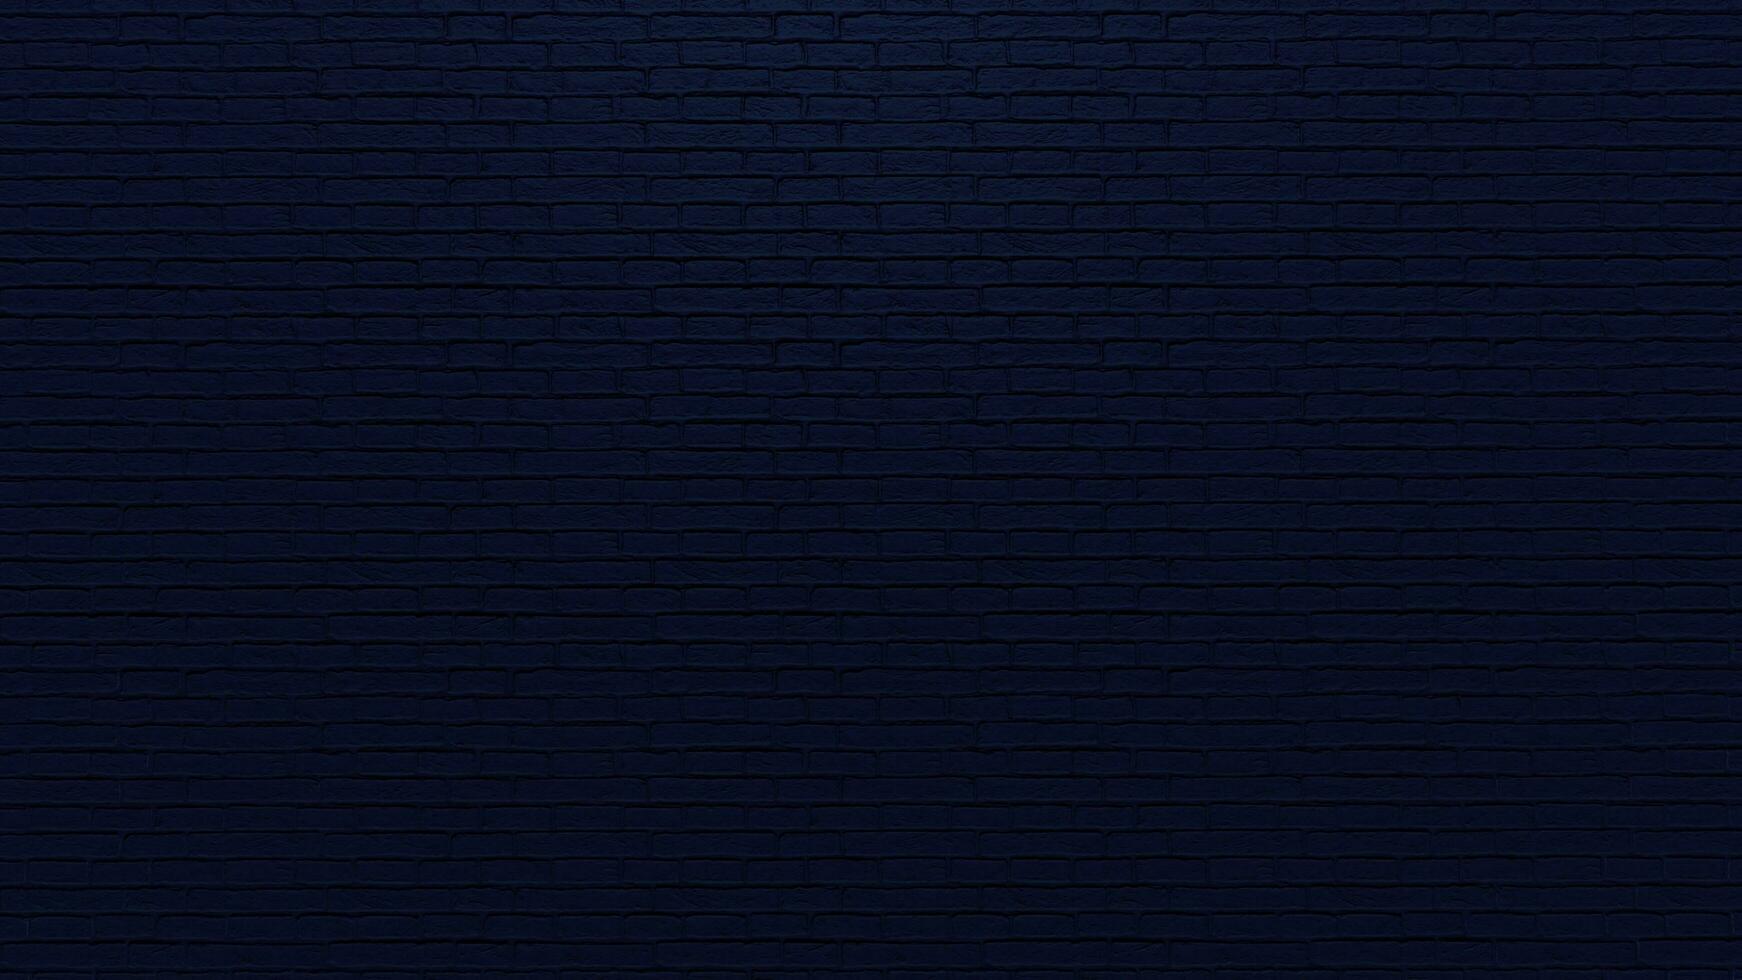 Brick pattern blue for background or cover photo